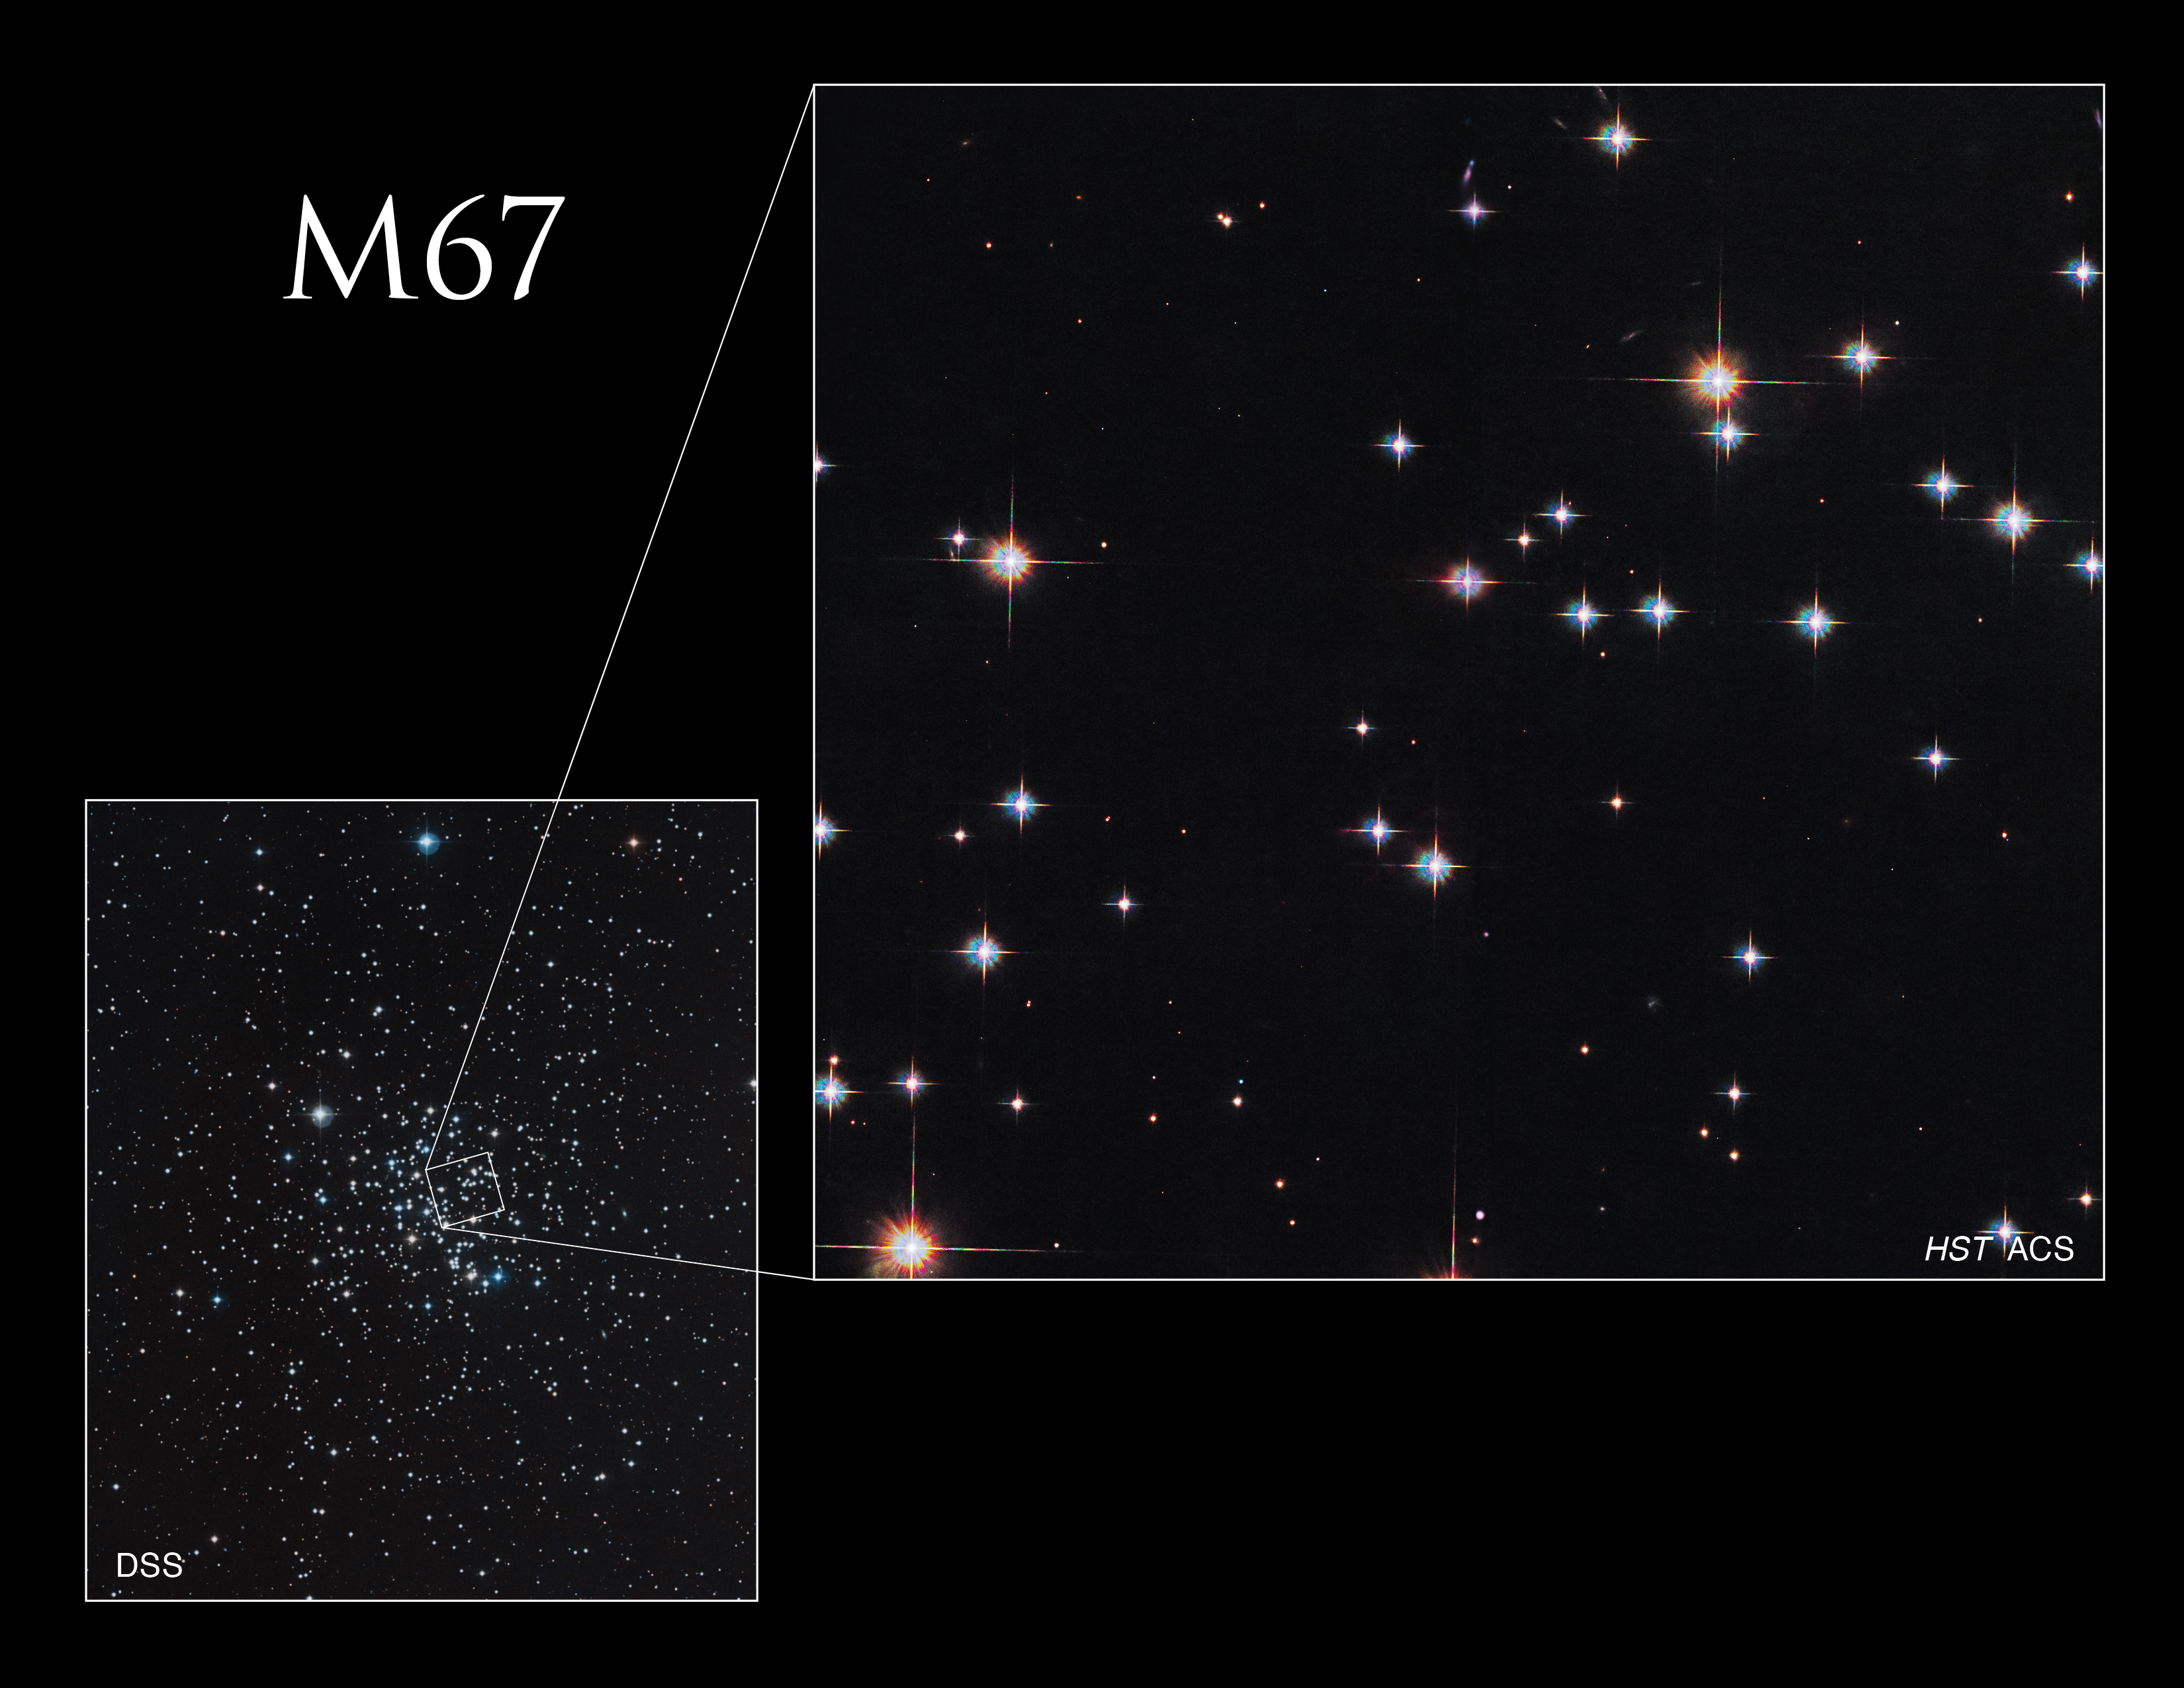 This picture shows a ground based image of open cluster Messier 44 with many stars, and a small callout box near the right-center of the cluster that shows the location of the Hubble image.